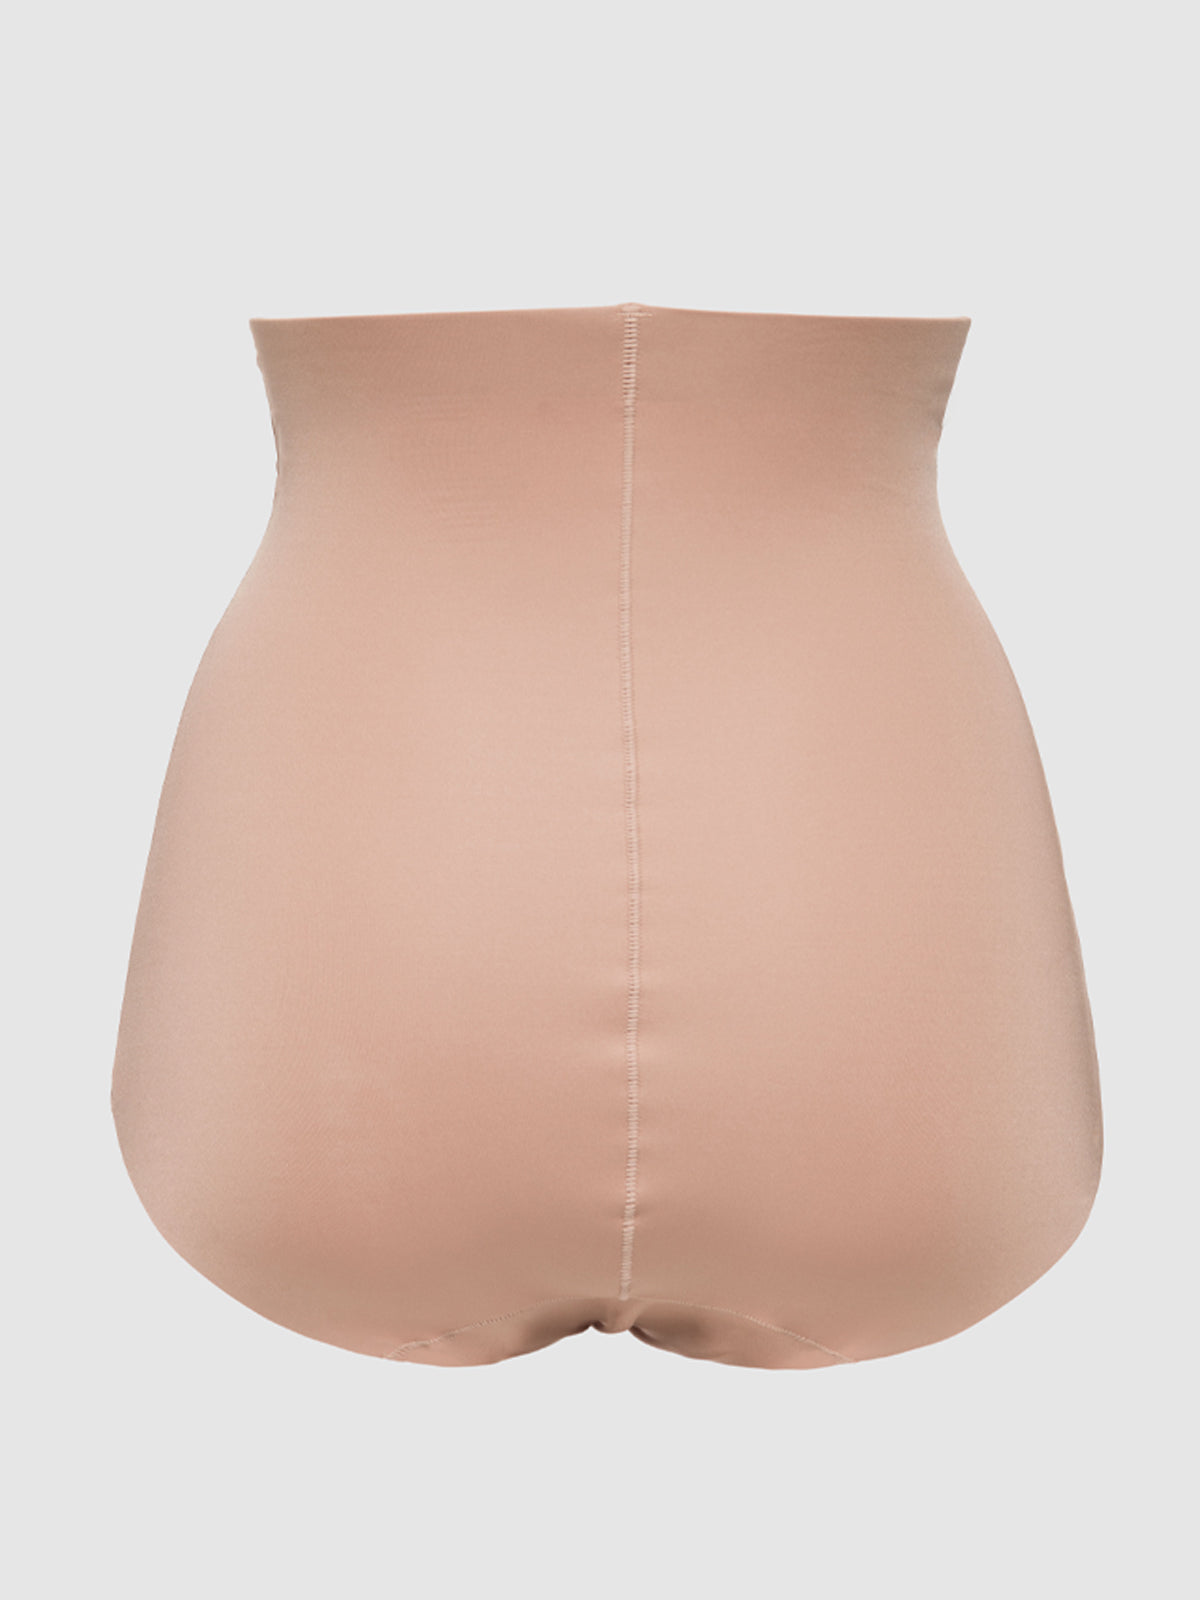 High-Waisted Underwear That Help Support Your Puson